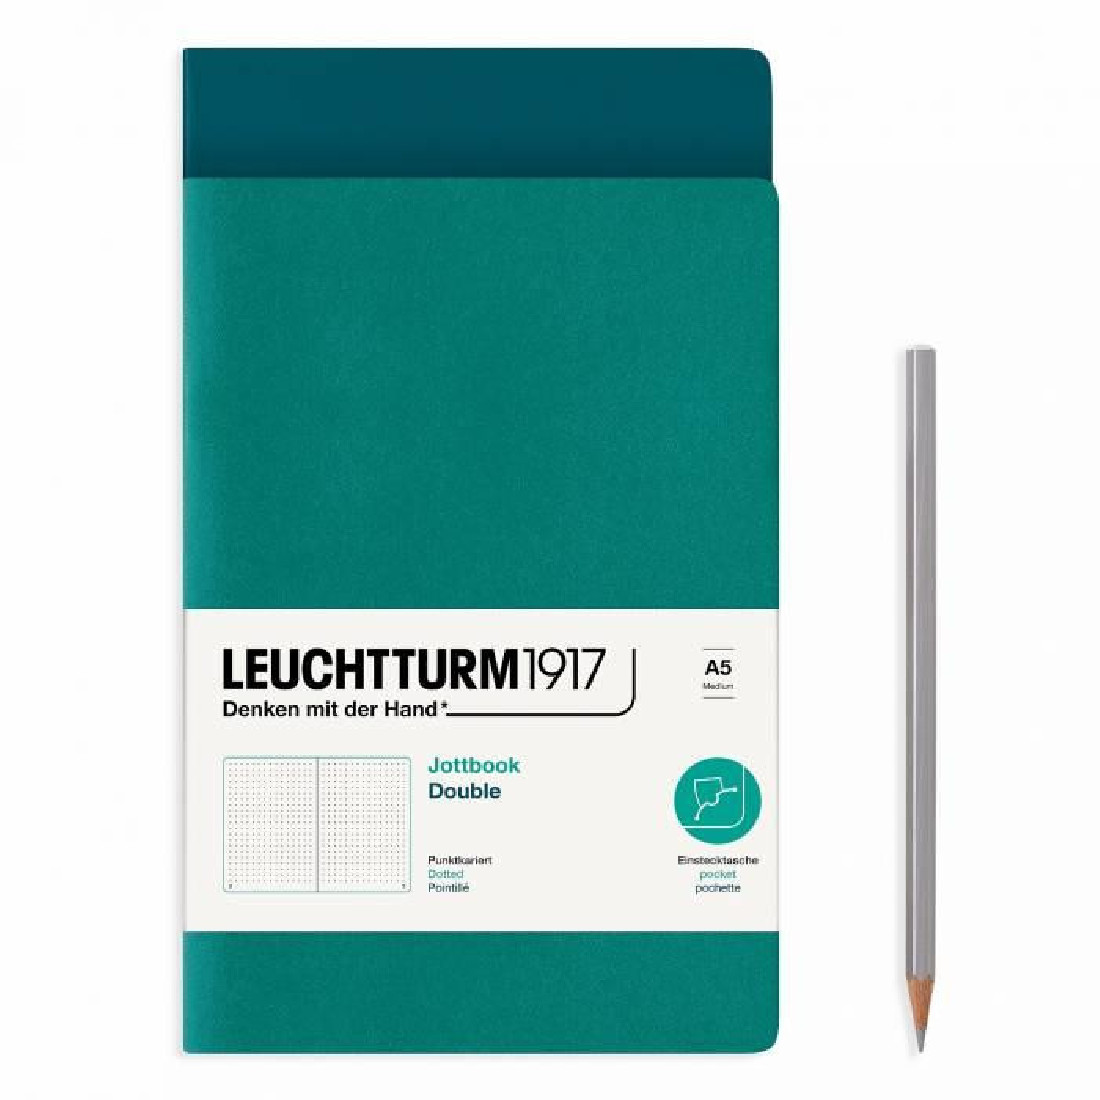 Leuchtturm 1917 Jottbook Double A5 Emerald and Pacific Green Dotted